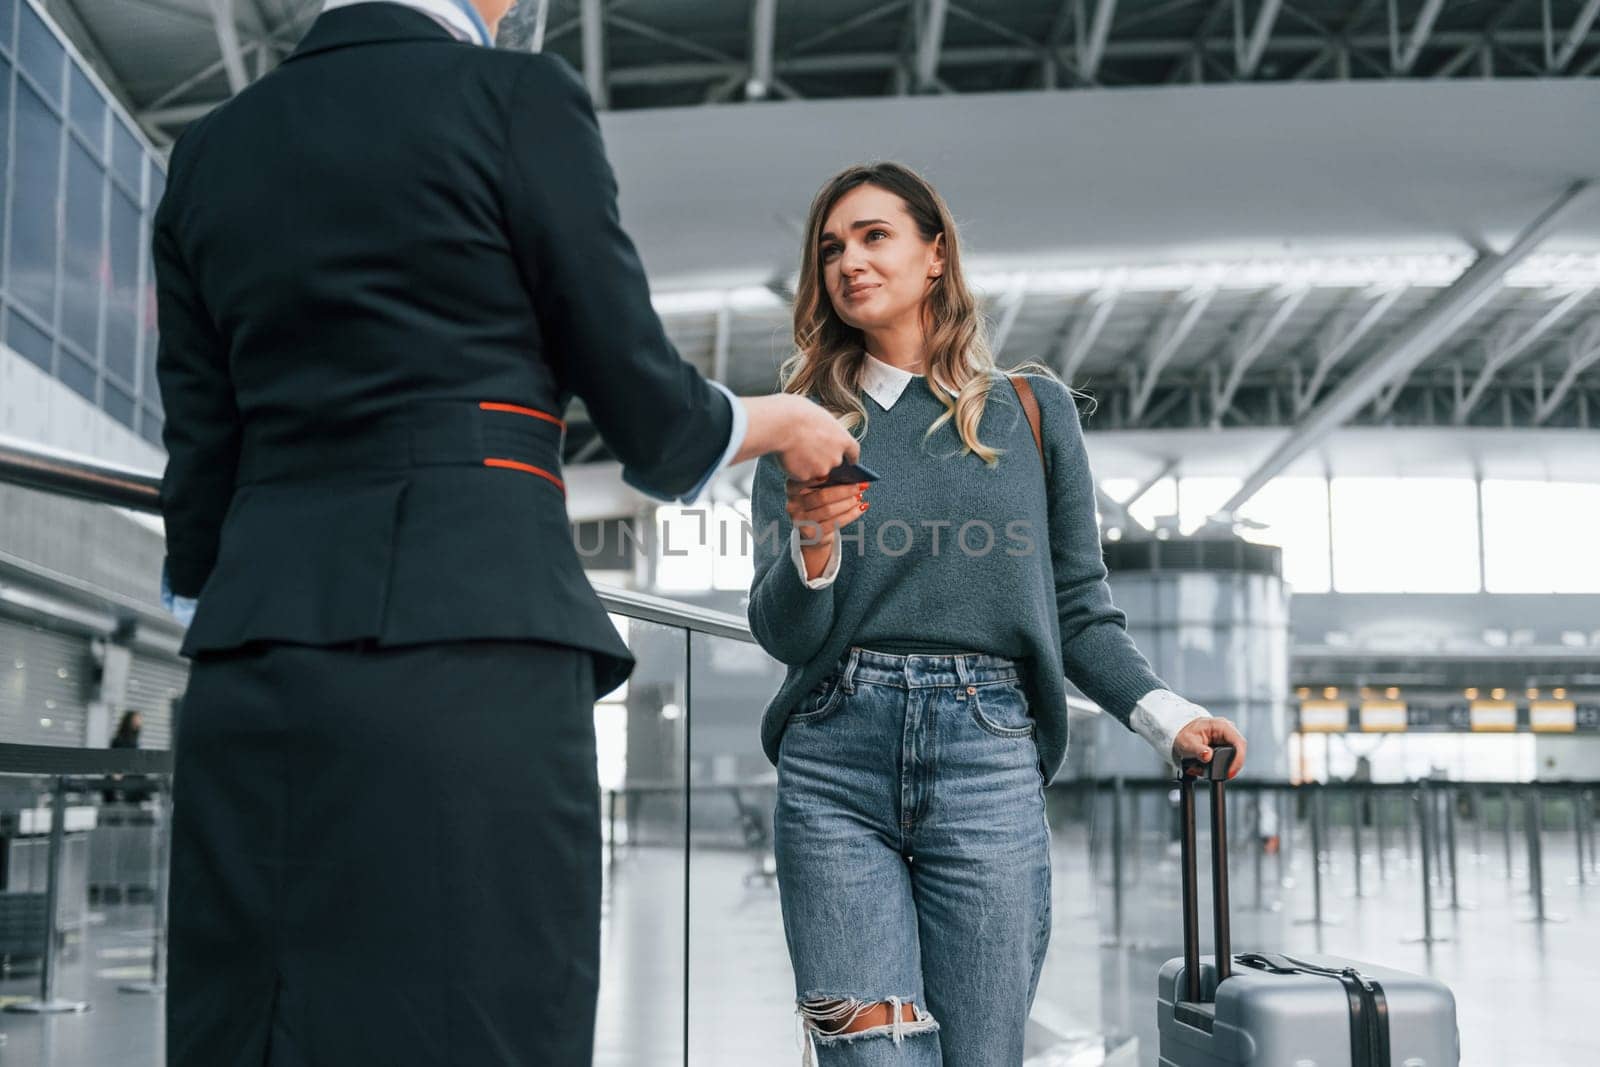 With documents. Young female tourist is in the airport at daytime by Standret